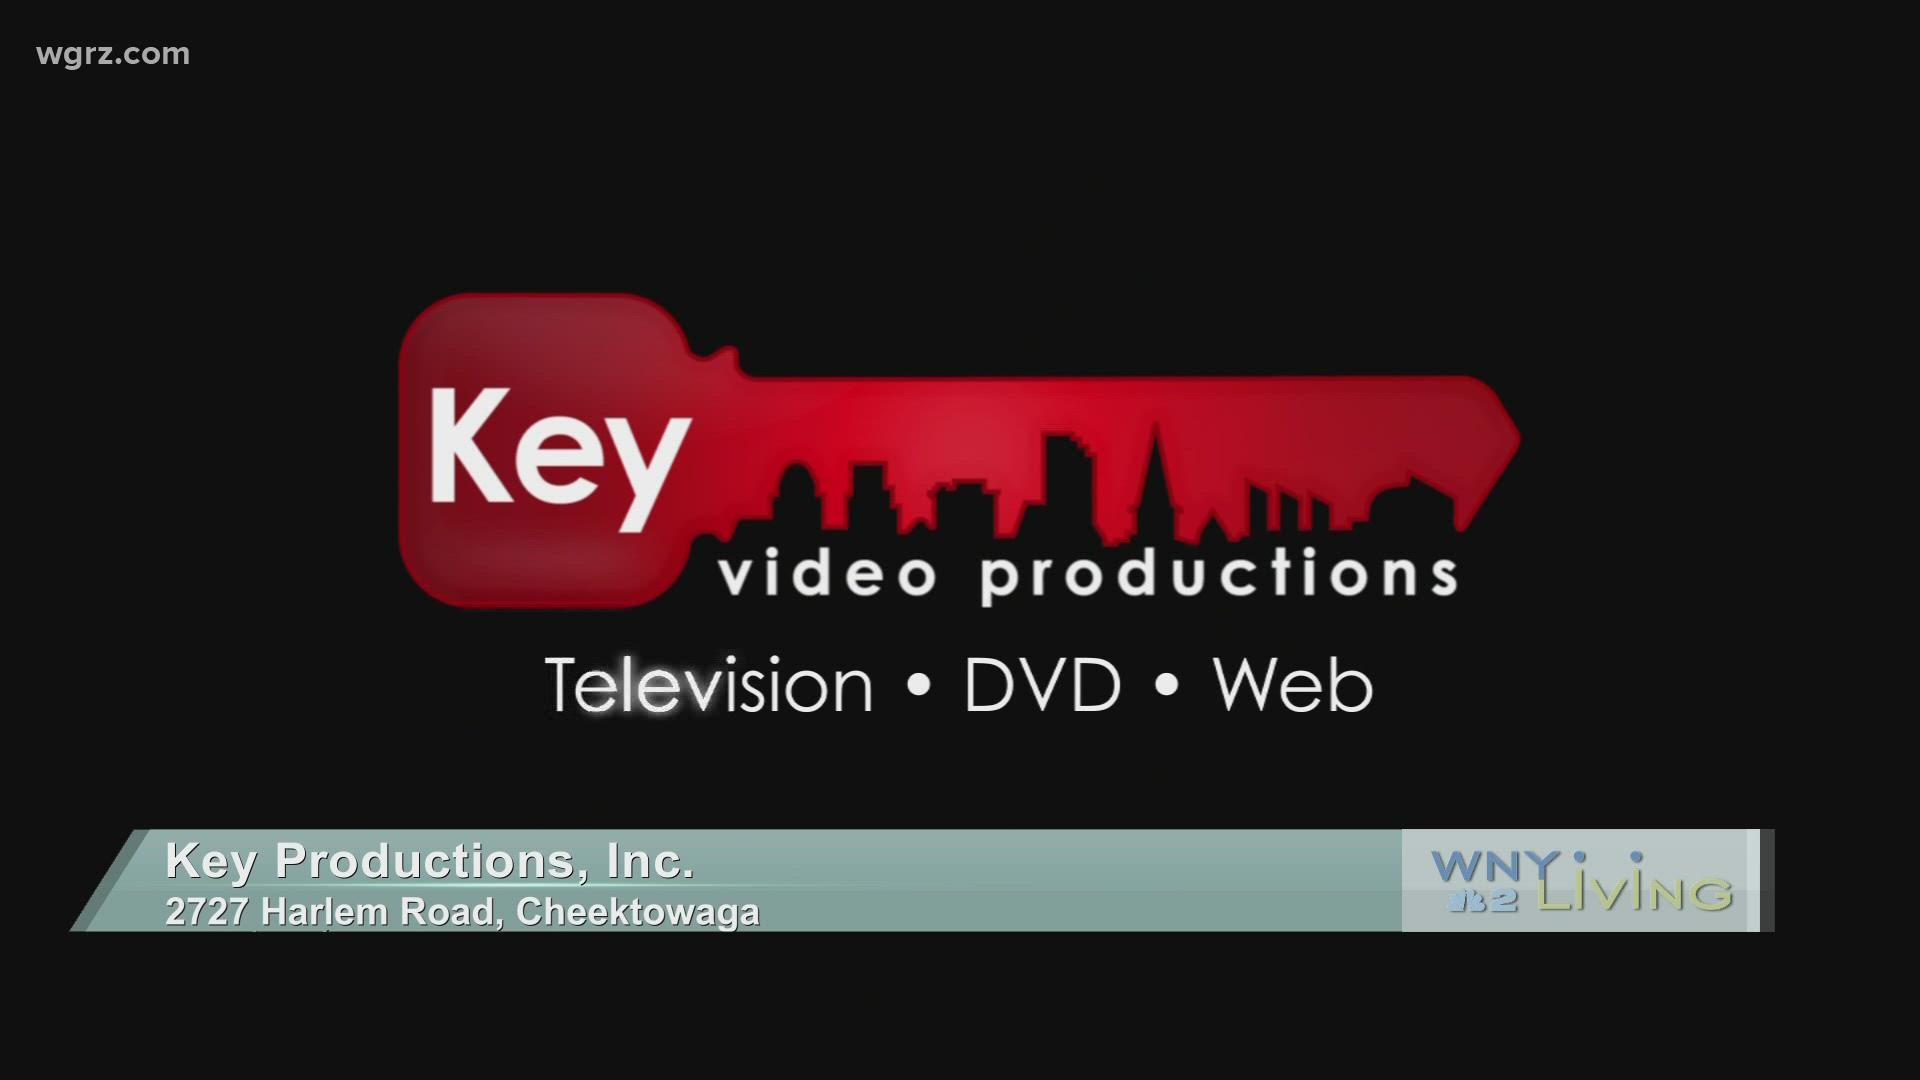 WNY Living - November 27 - Key Productions, Inc. (THIS VIDEO IS SPONSORED BY KEY PRODUCTIONS, INC.)